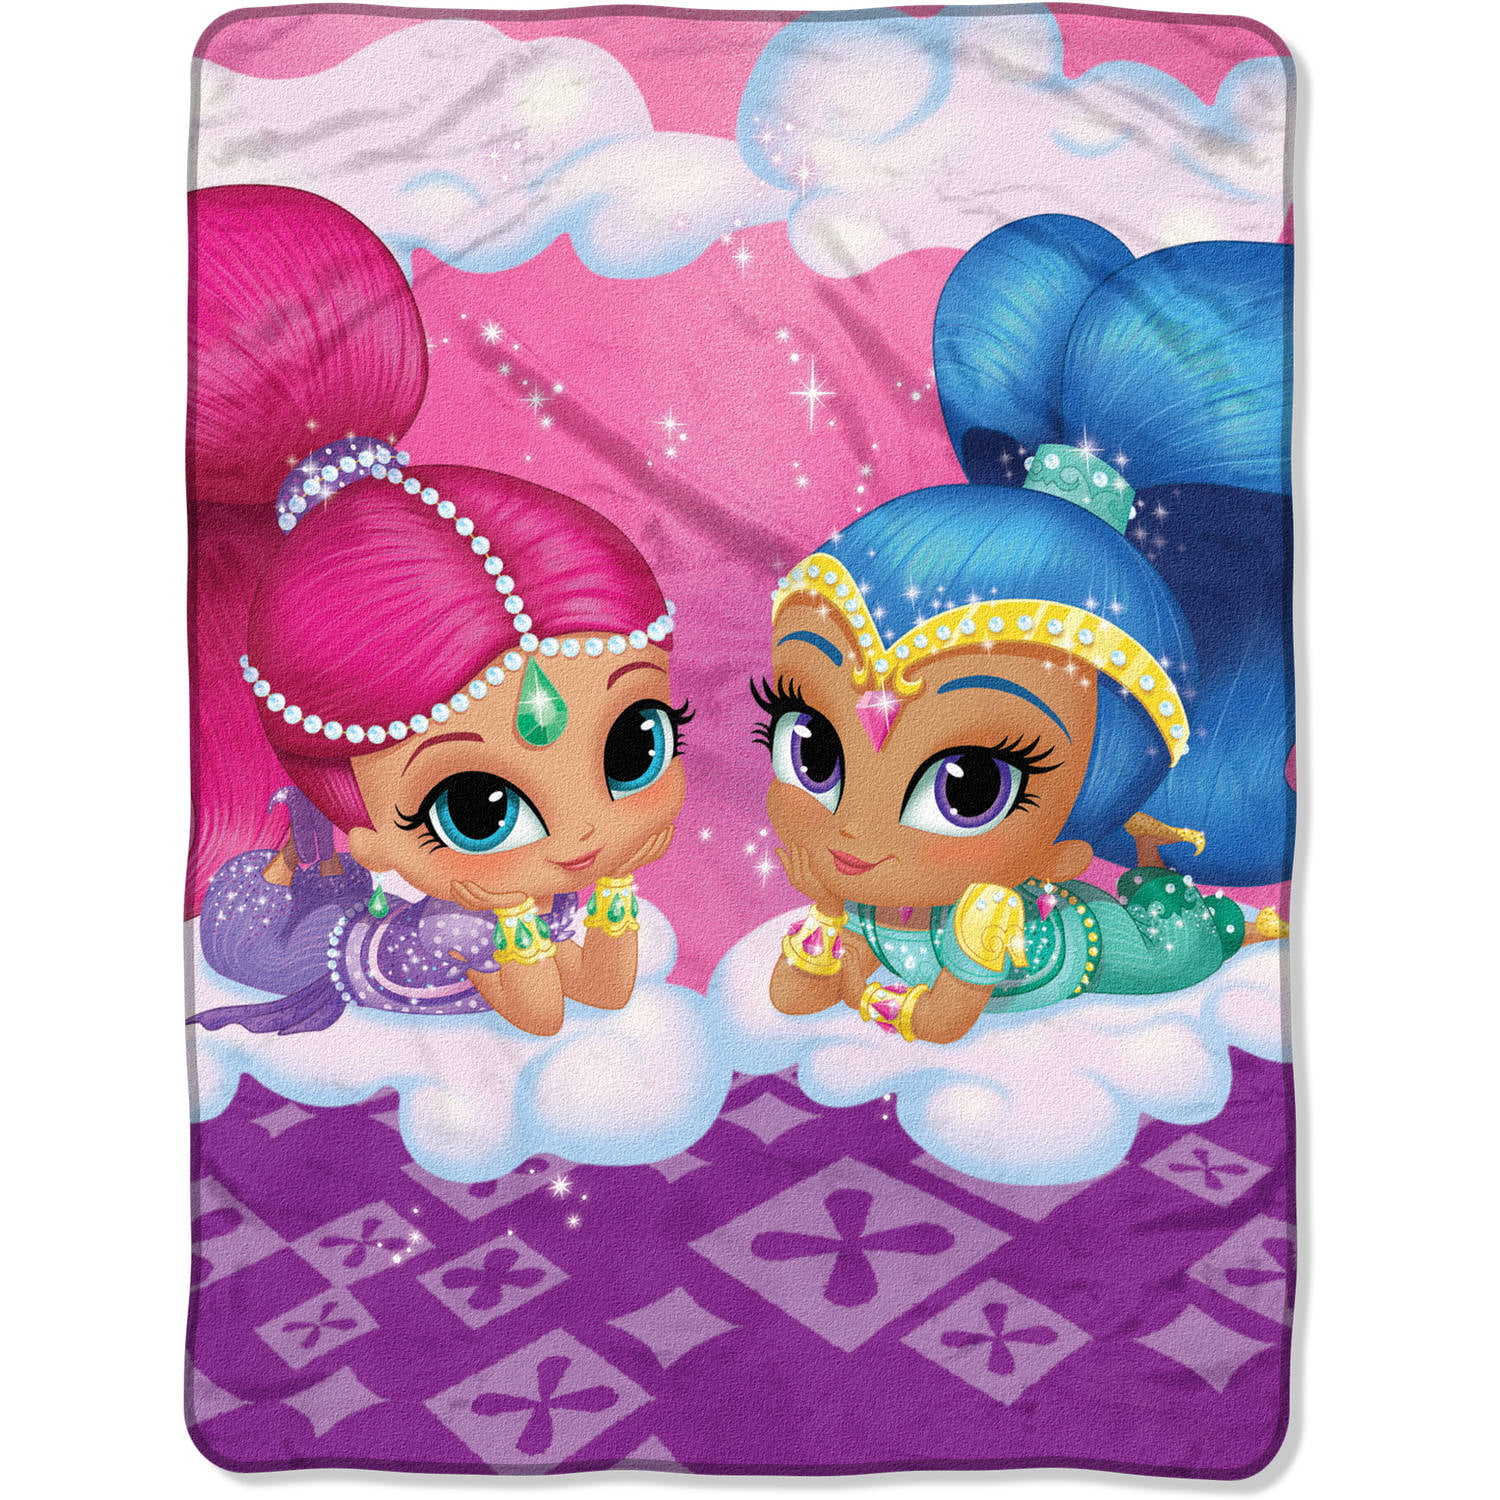 Shimmer and Shine Being Shine Comfy Throw 